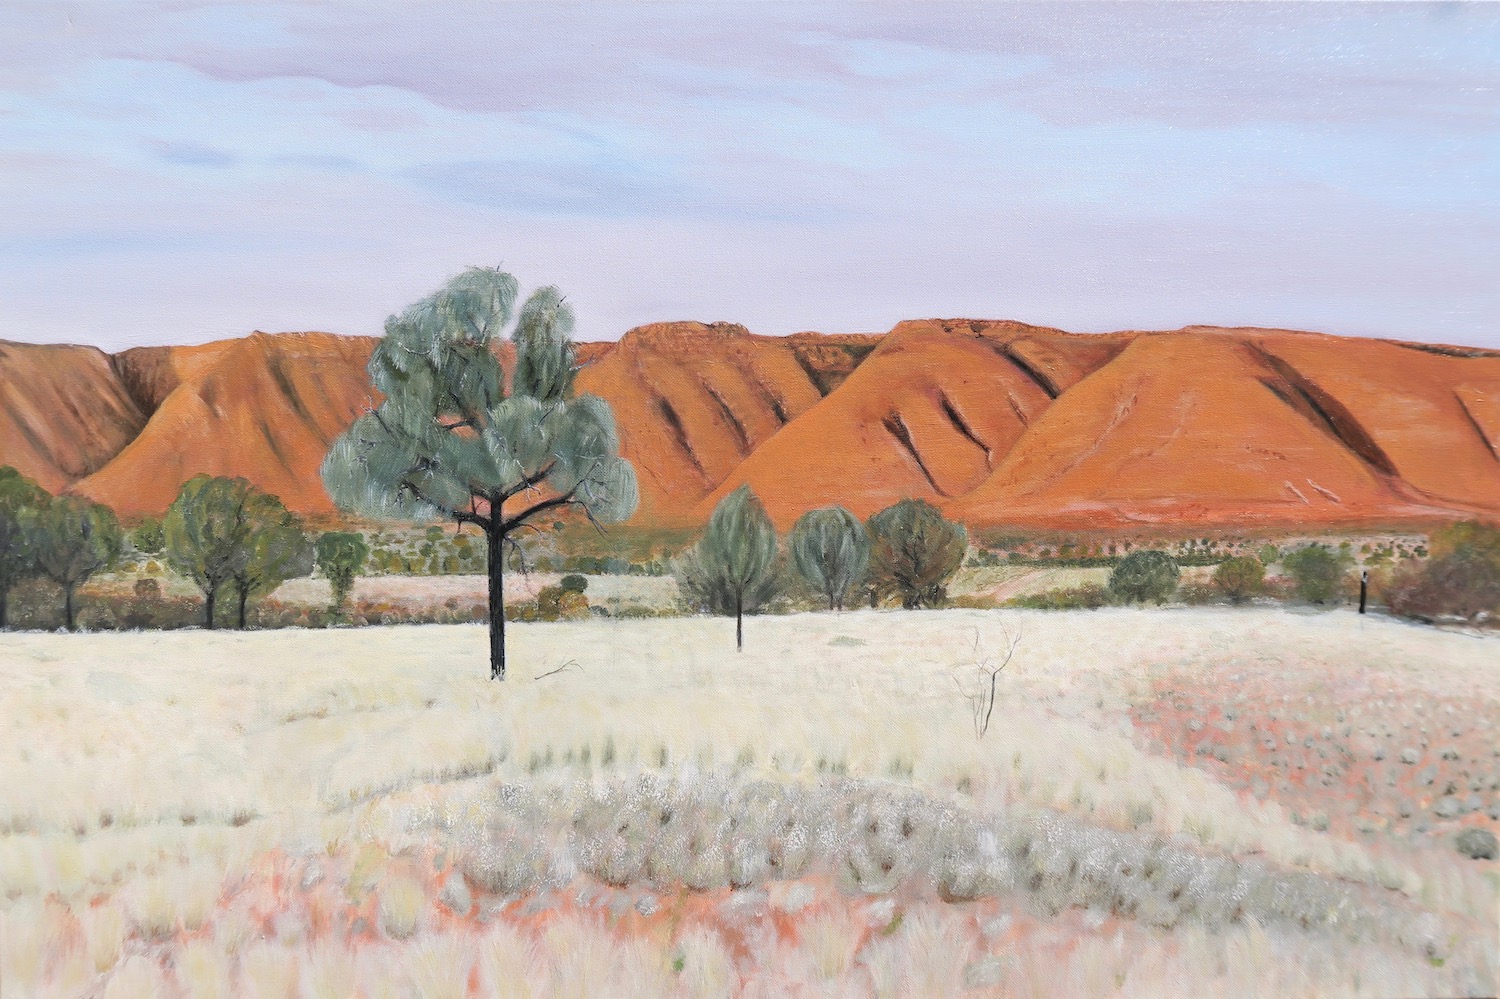 Landscape of On the way to Uluru by Niko Dujmovic